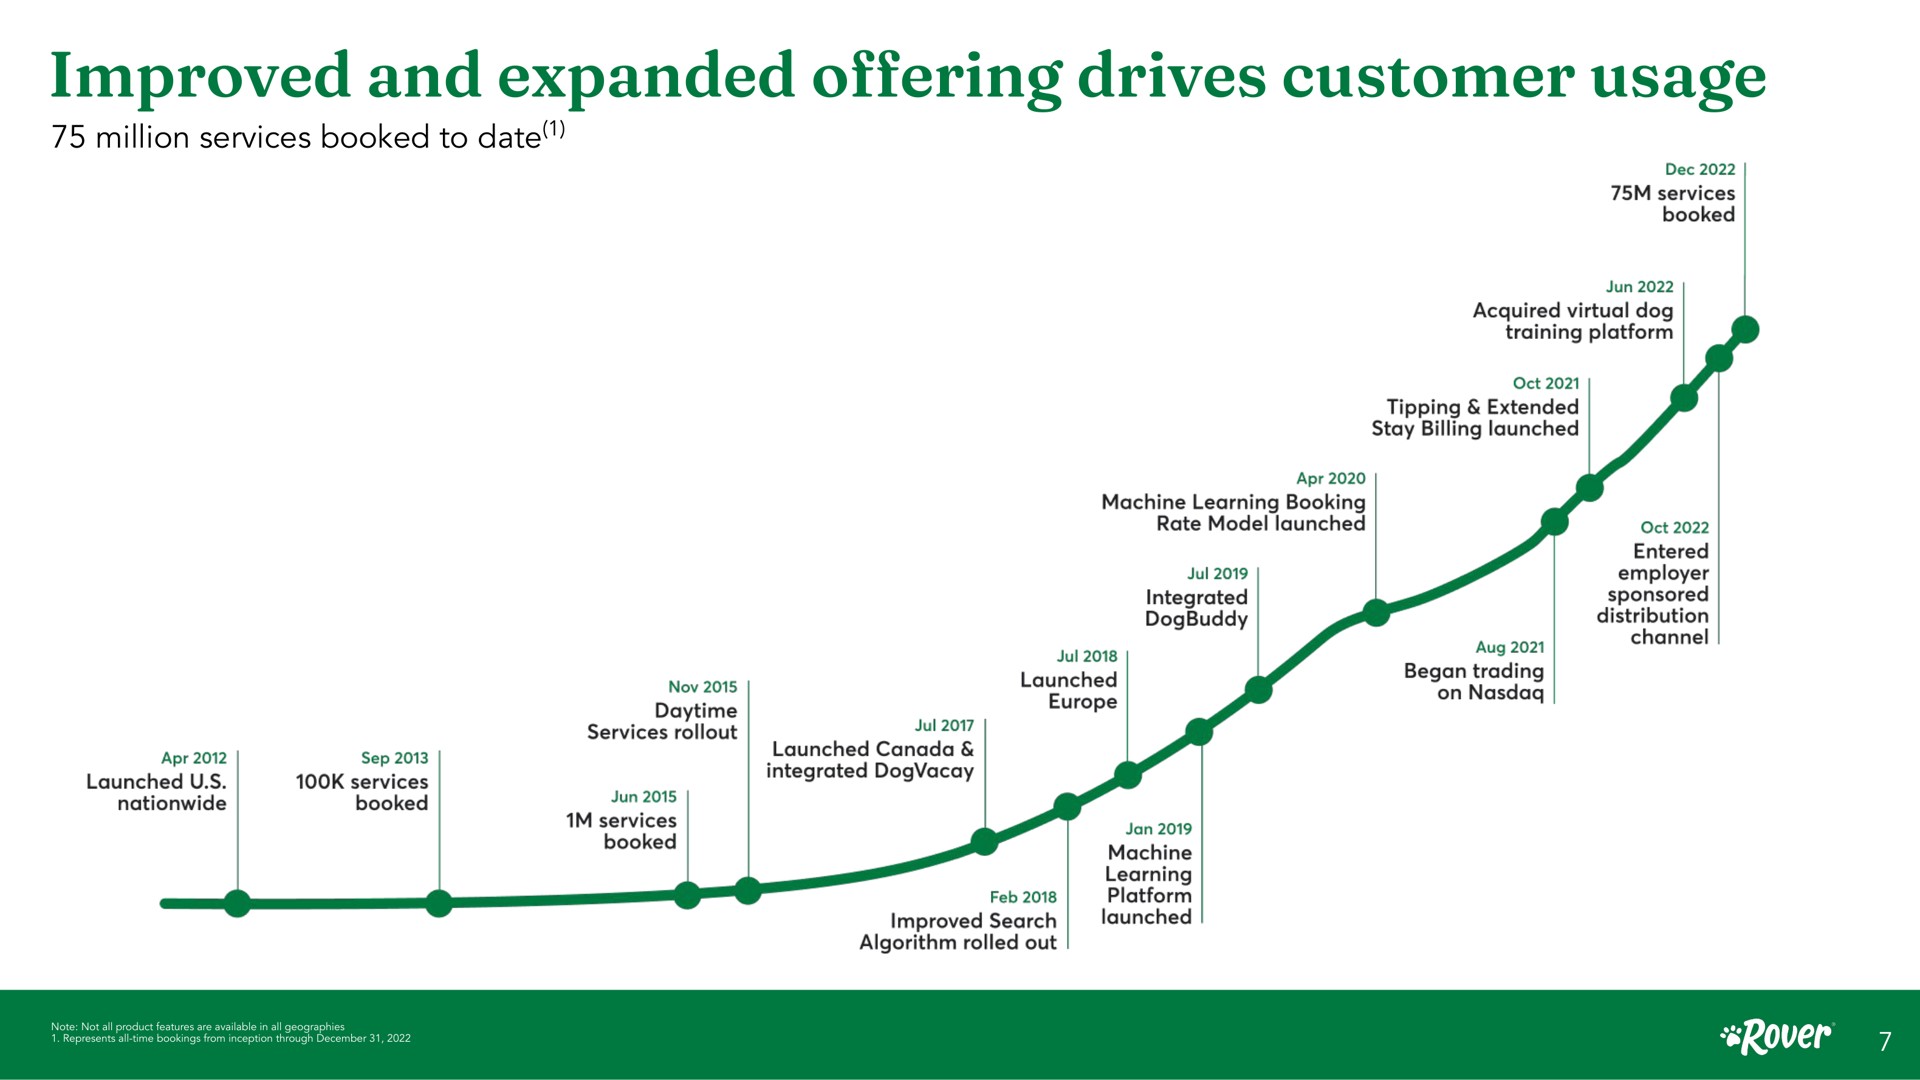 improved and expanded drives customer usage offering million services booked to date services booked acquired virtual dog training platform tipping extended stay billing launched entered employer sponsored distribution channel trading on machine learning booking rate model launched integrated daytime services launched canada integrated hatches services booked search algorithm rolled out machine learning platform launched launched nationwide services booked | Rover